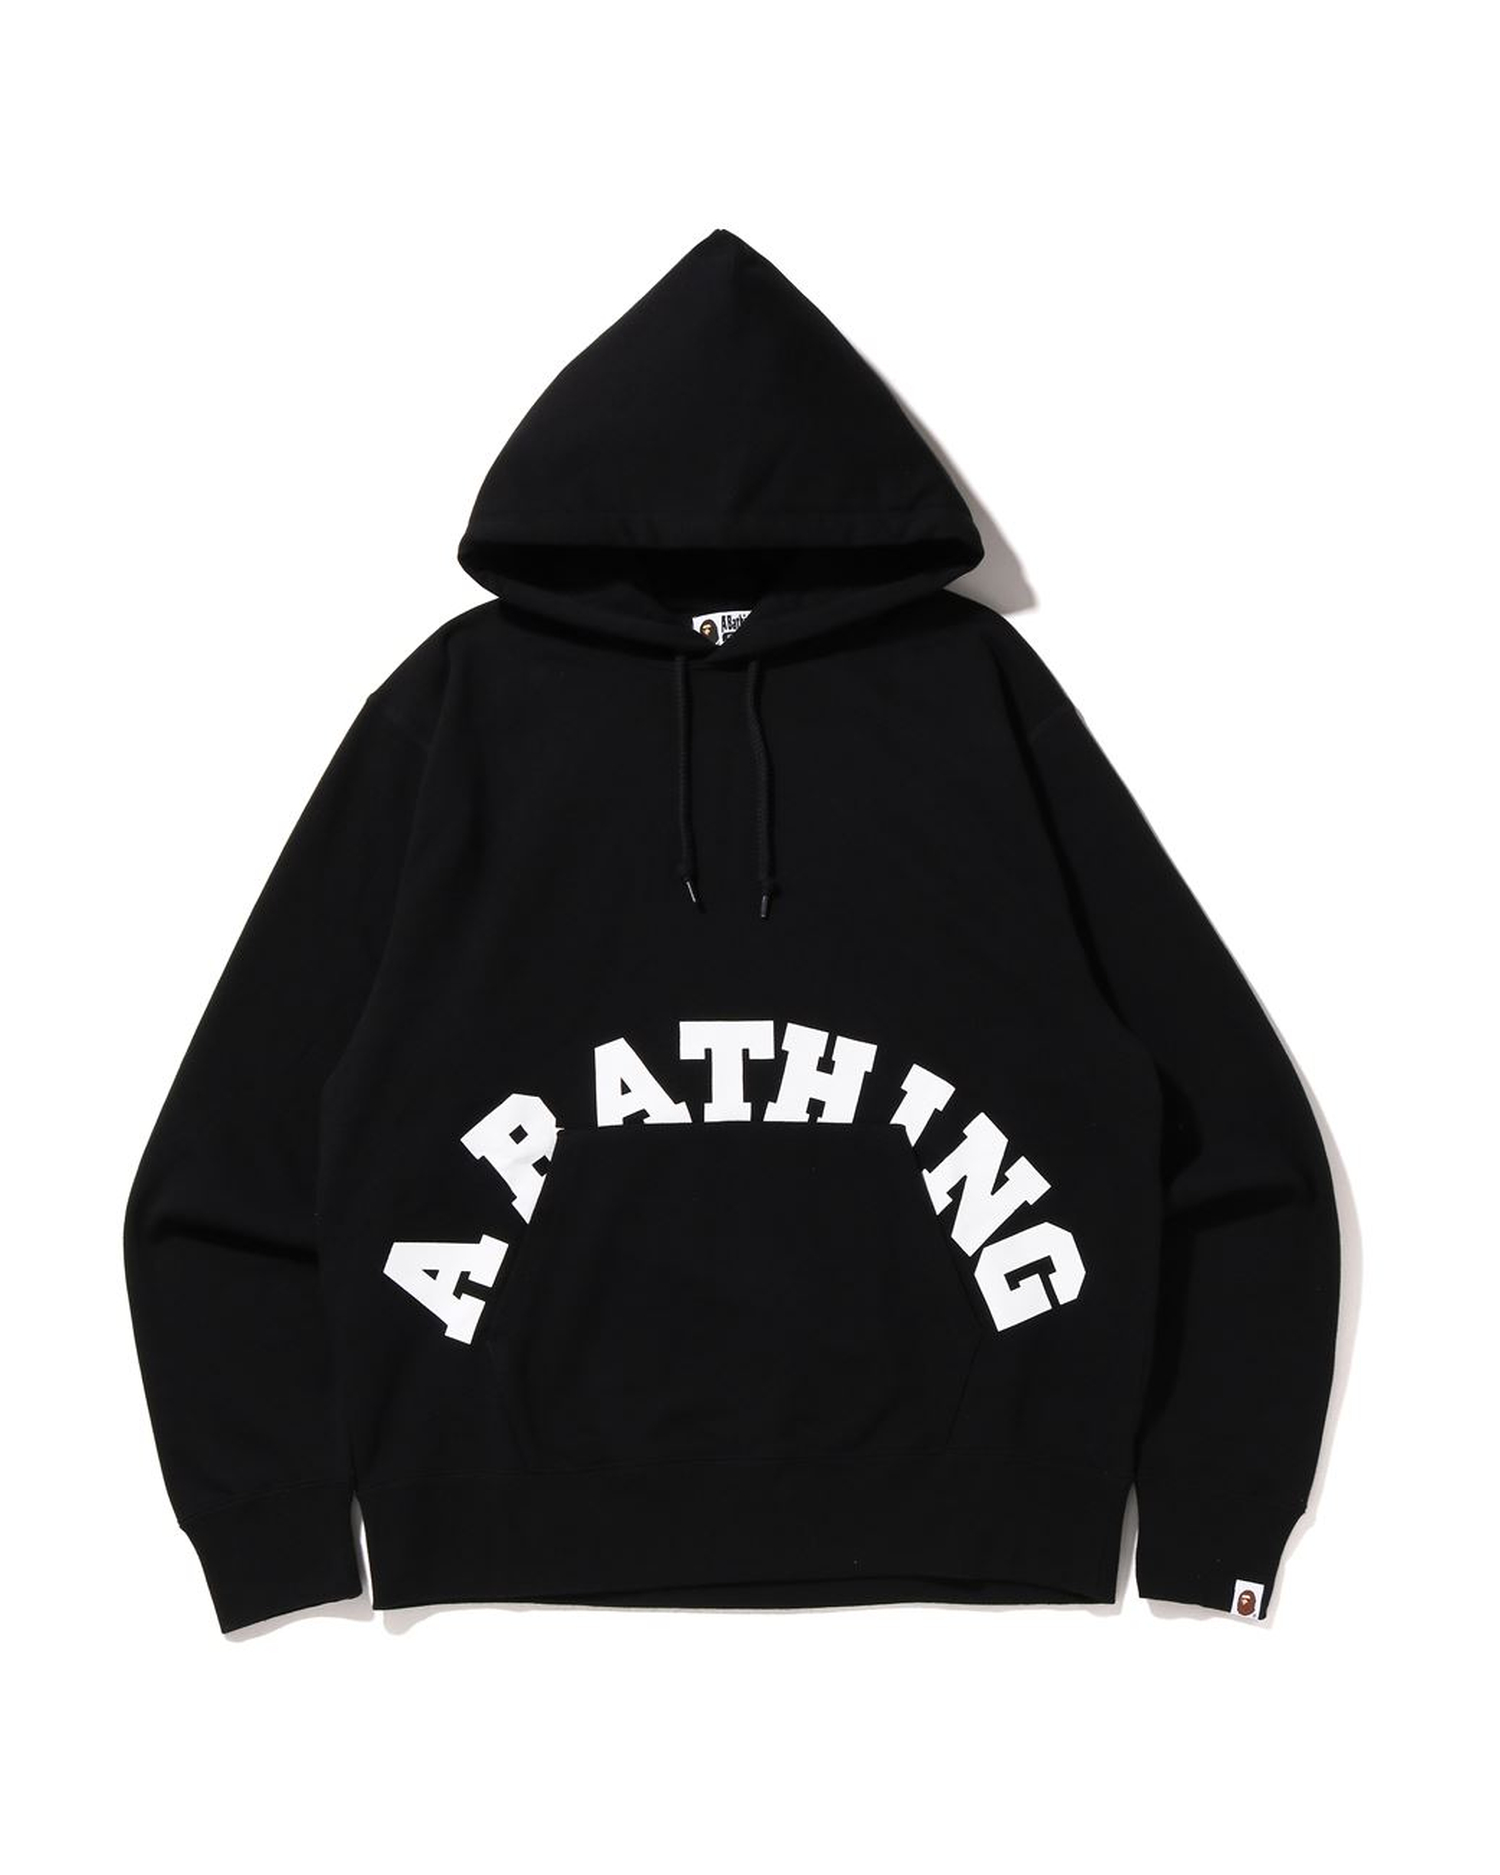 Shop Giant Ape Head Relaxed Fit Pullover Hoodie Online | BAPE